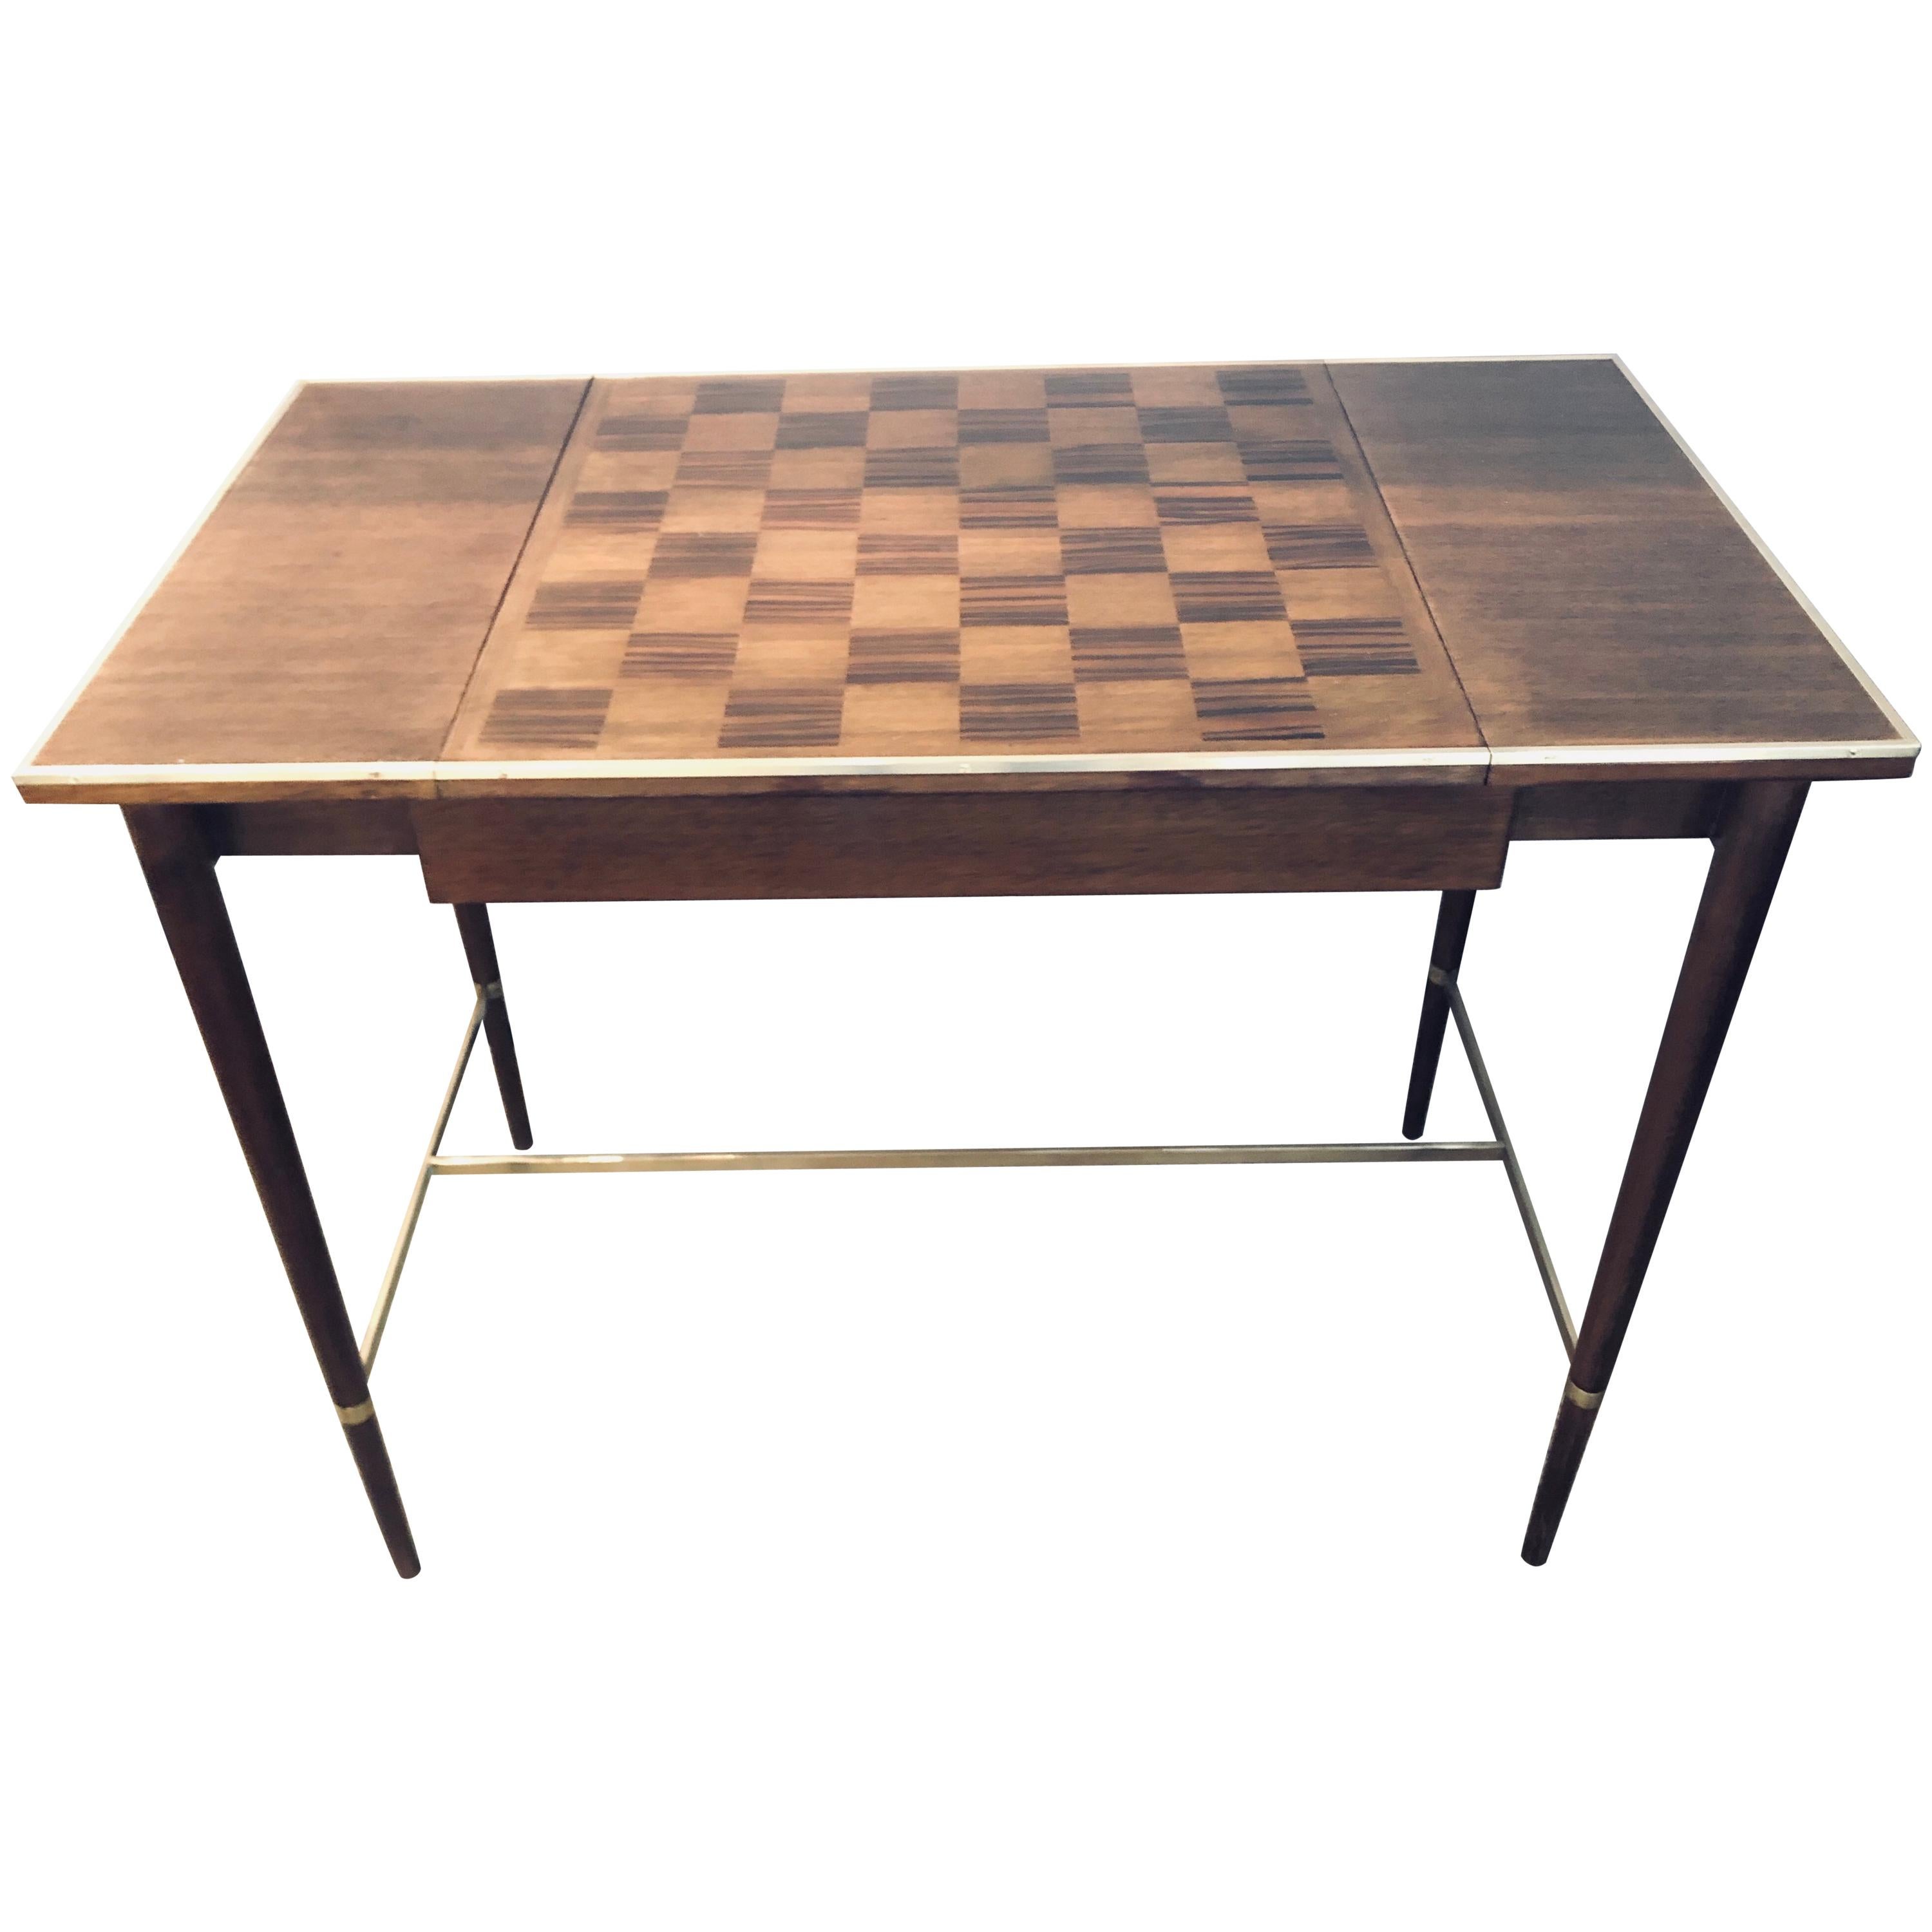 MCM Game / Card Table "The Paul McCobb Connoisseur Collection" Fully Refinished